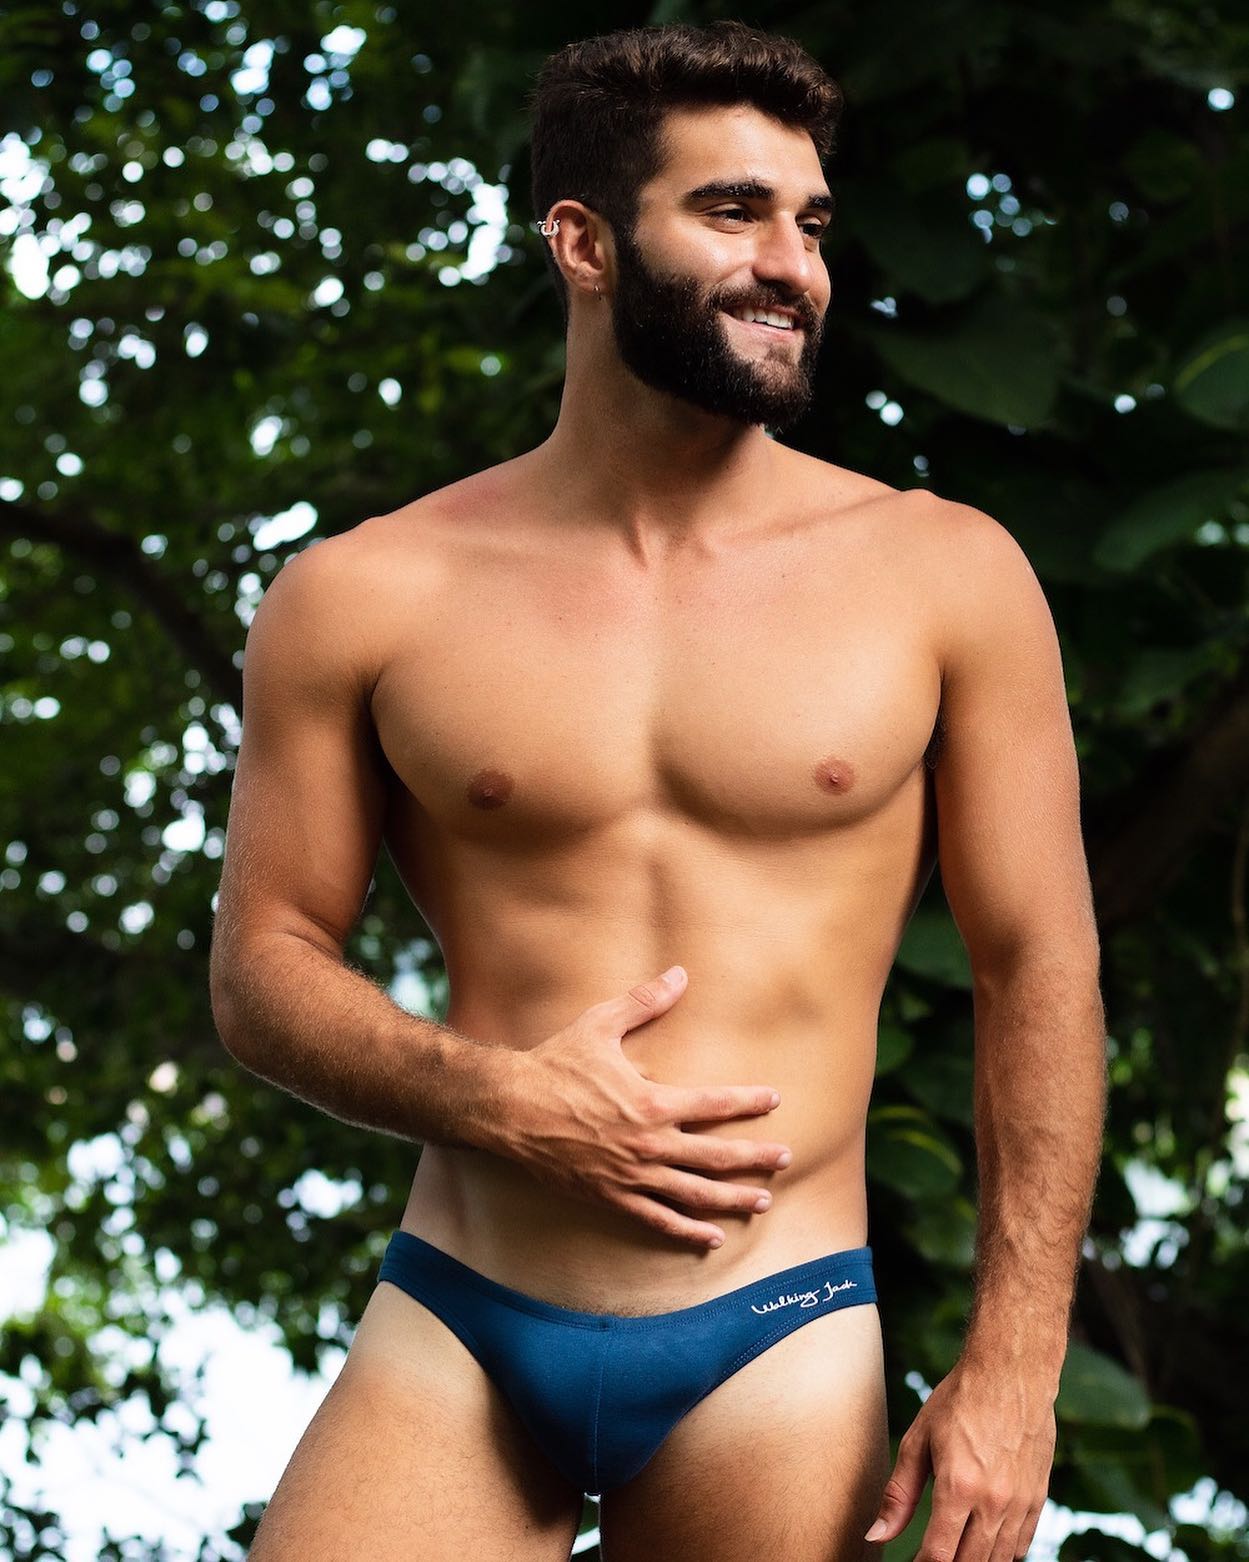 This is the sexiest creation of the Greek brand Walking Jack! The new navy blue Micro Briefs are made with organic cotton, GOTS certified in a slim fitting, extremely low-rise mini briefs style with covered elastics around the waist and the legs to keep it in place. Check it out:
____
menandunderwear.com/shop